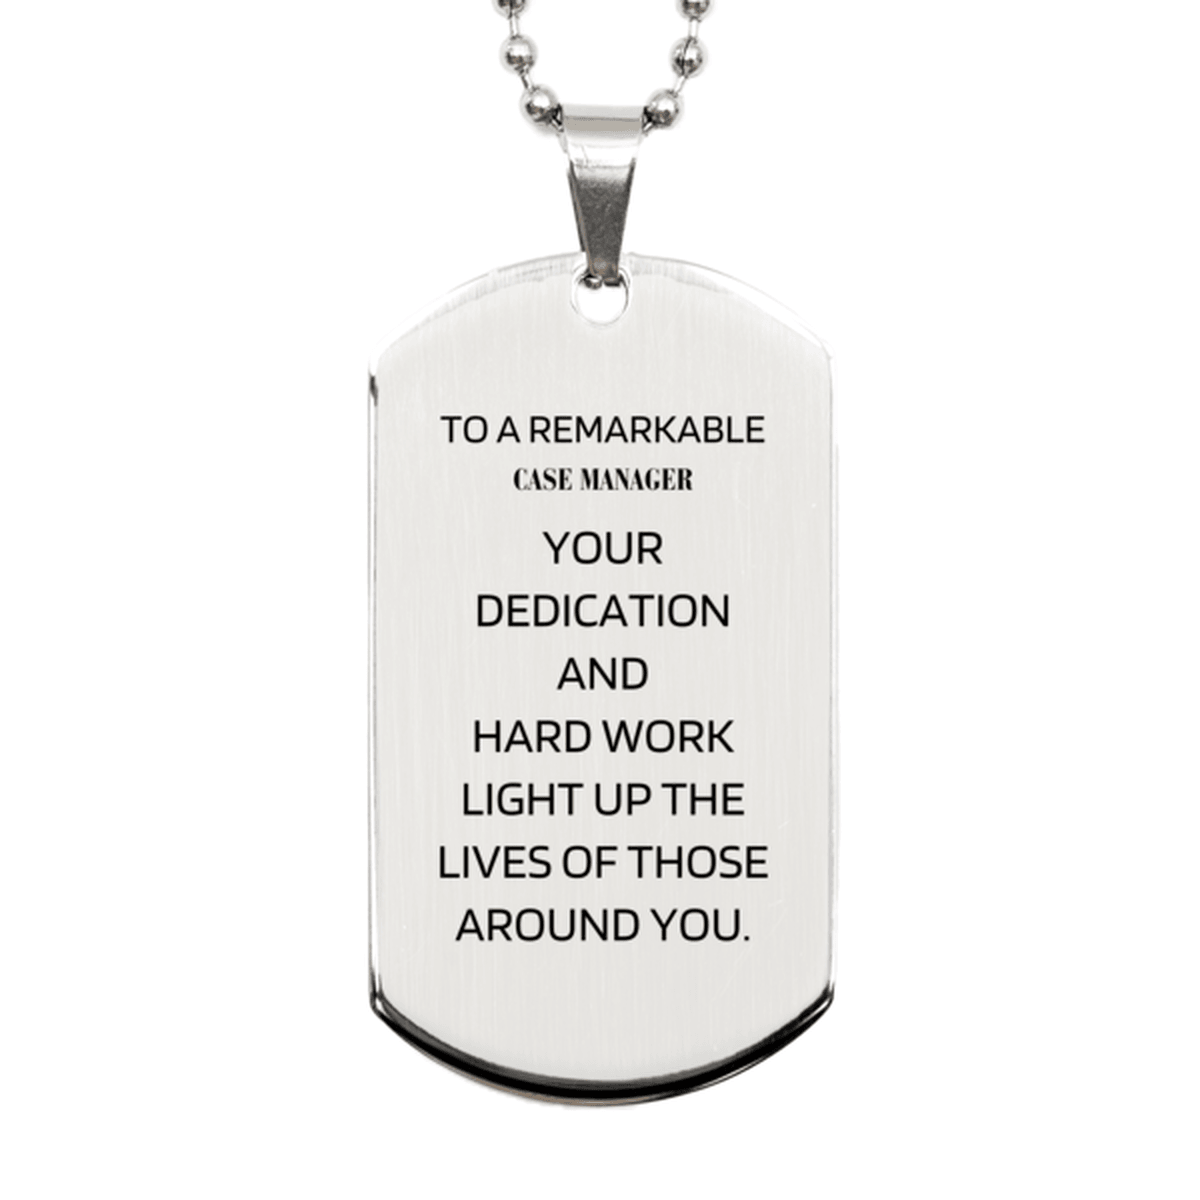 Remarkable Case Manager Gifts, Your dedication and hard work, Inspirational Birthday Christmas Unique Silver Dog Tag For Case Manager, Coworkers, Men, Women, Friends - Mallard Moon Gift Shop